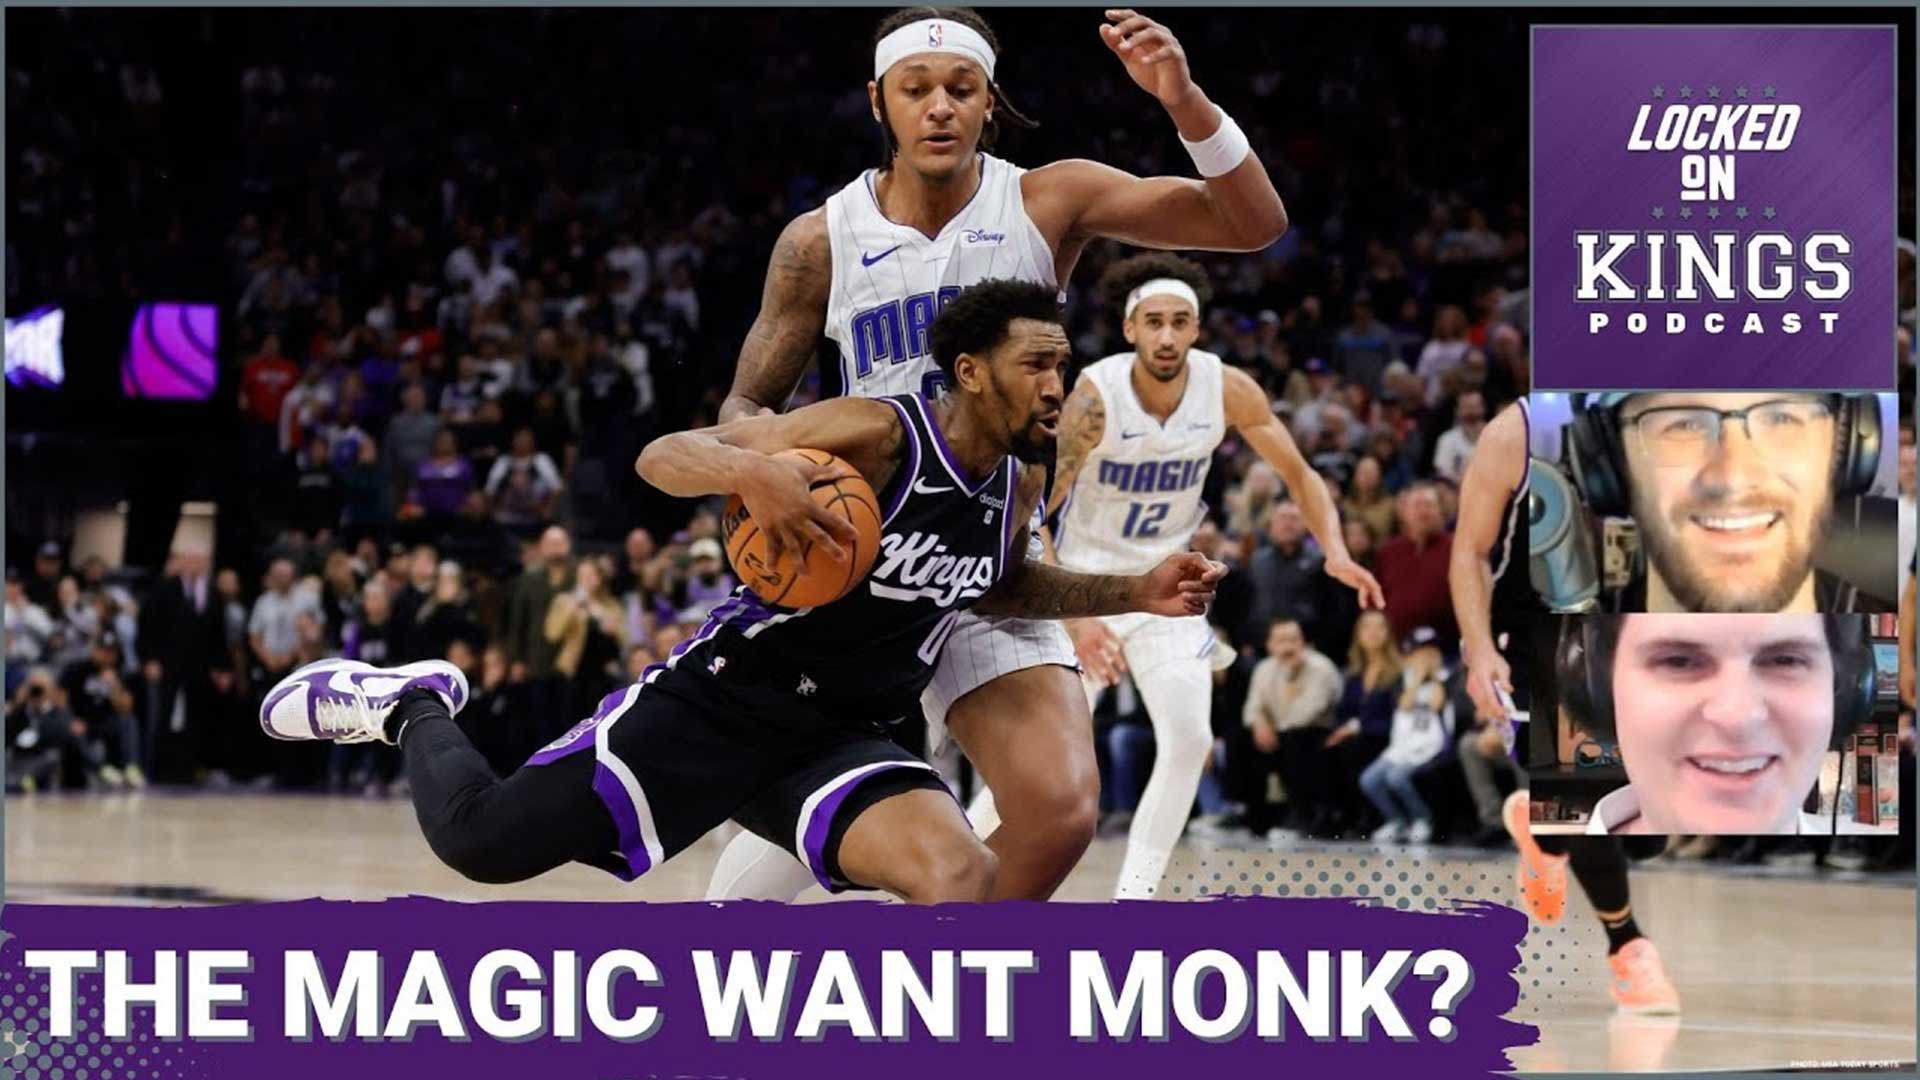 Matt George is joined by Locked On Magic host Philip Rossman-Reich to discuss the Orlando Magic's interest level in Malik Monk.